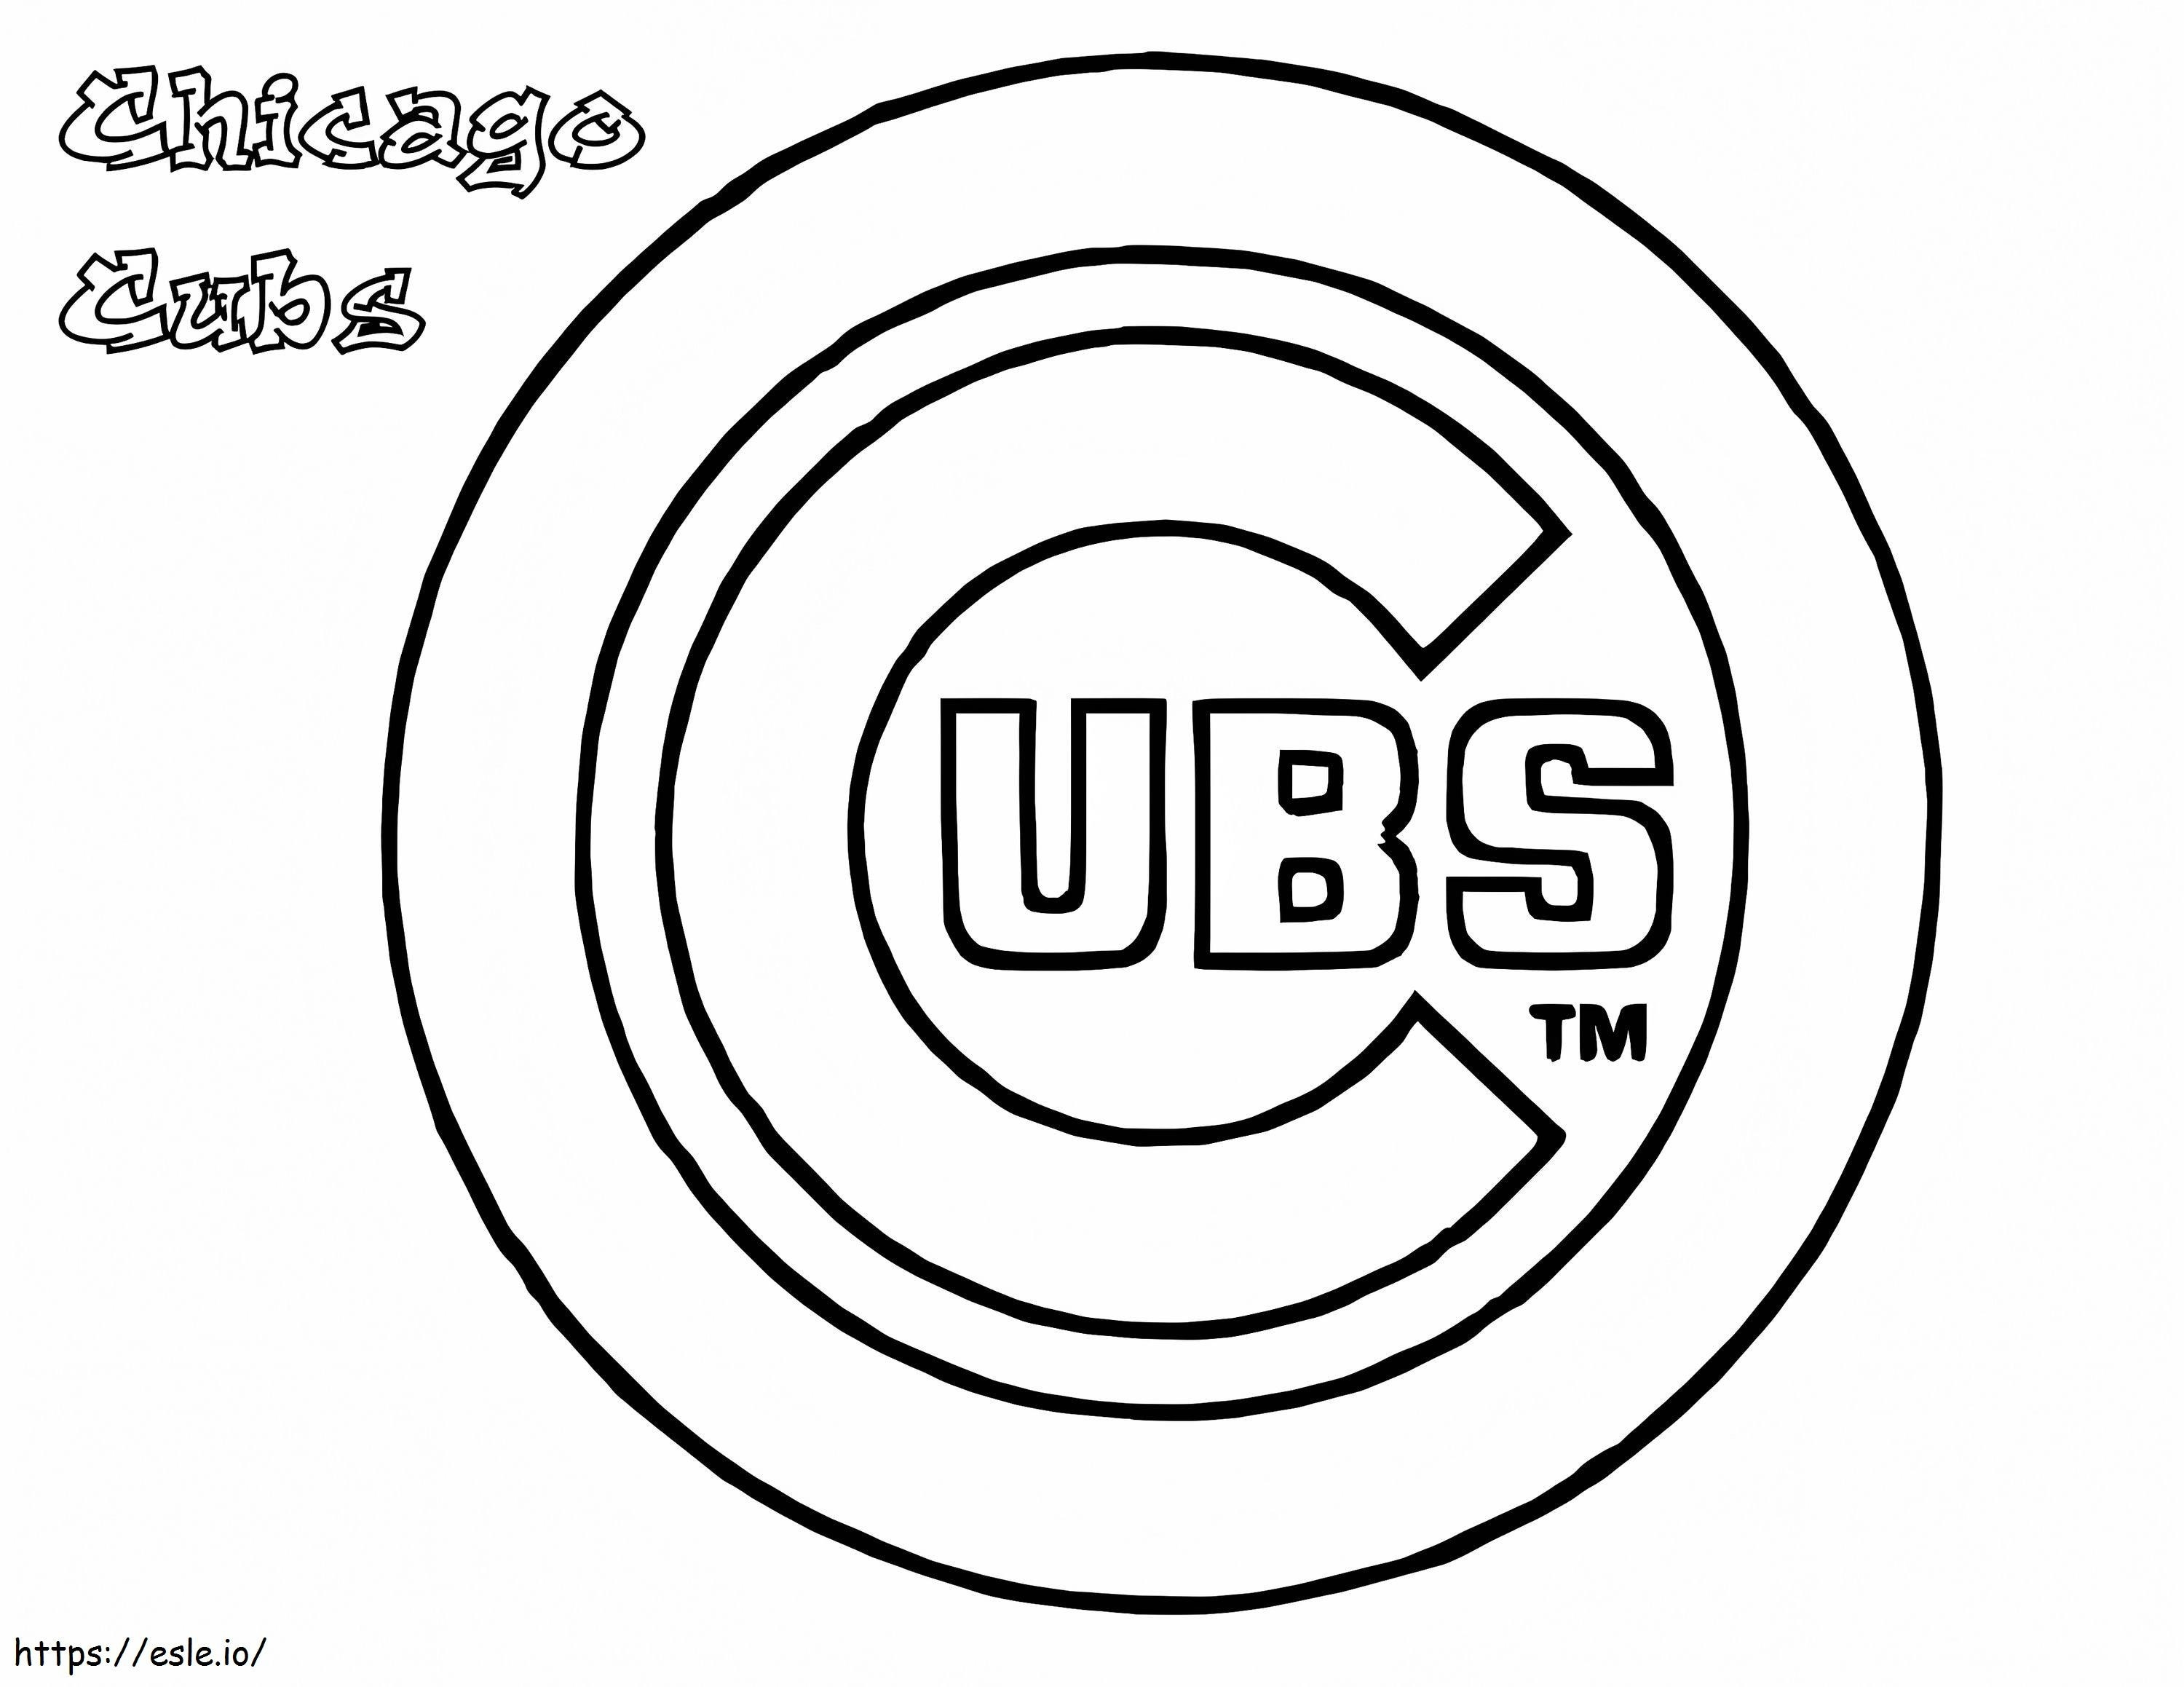 Chicago Cubs 1 coloring page